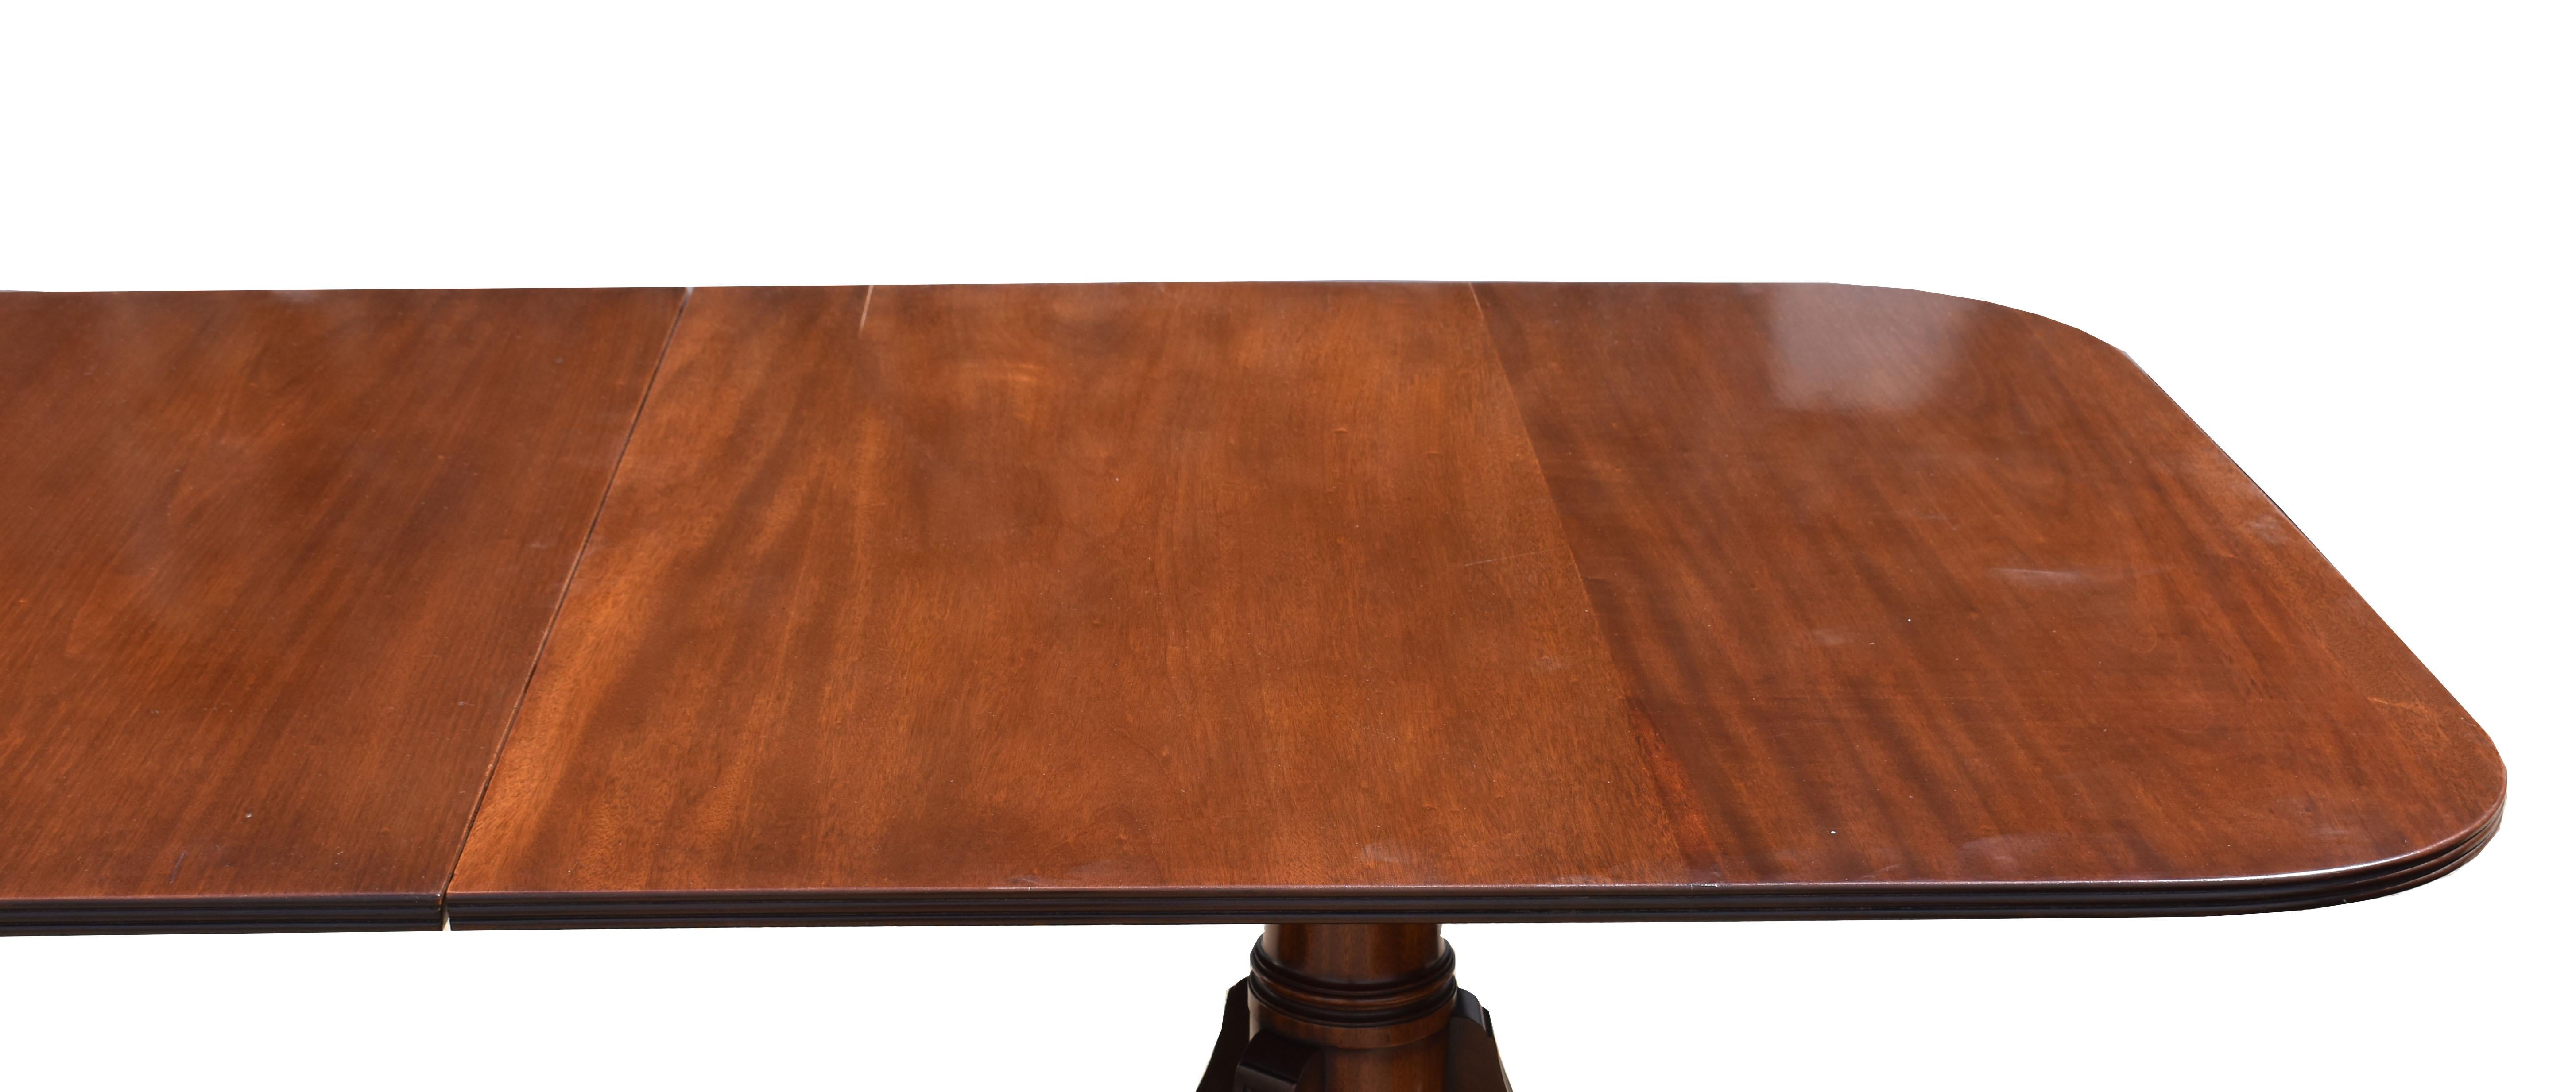 20th Century English Antique Regency Style Solid Mahogany Pedestal Dining Table 2